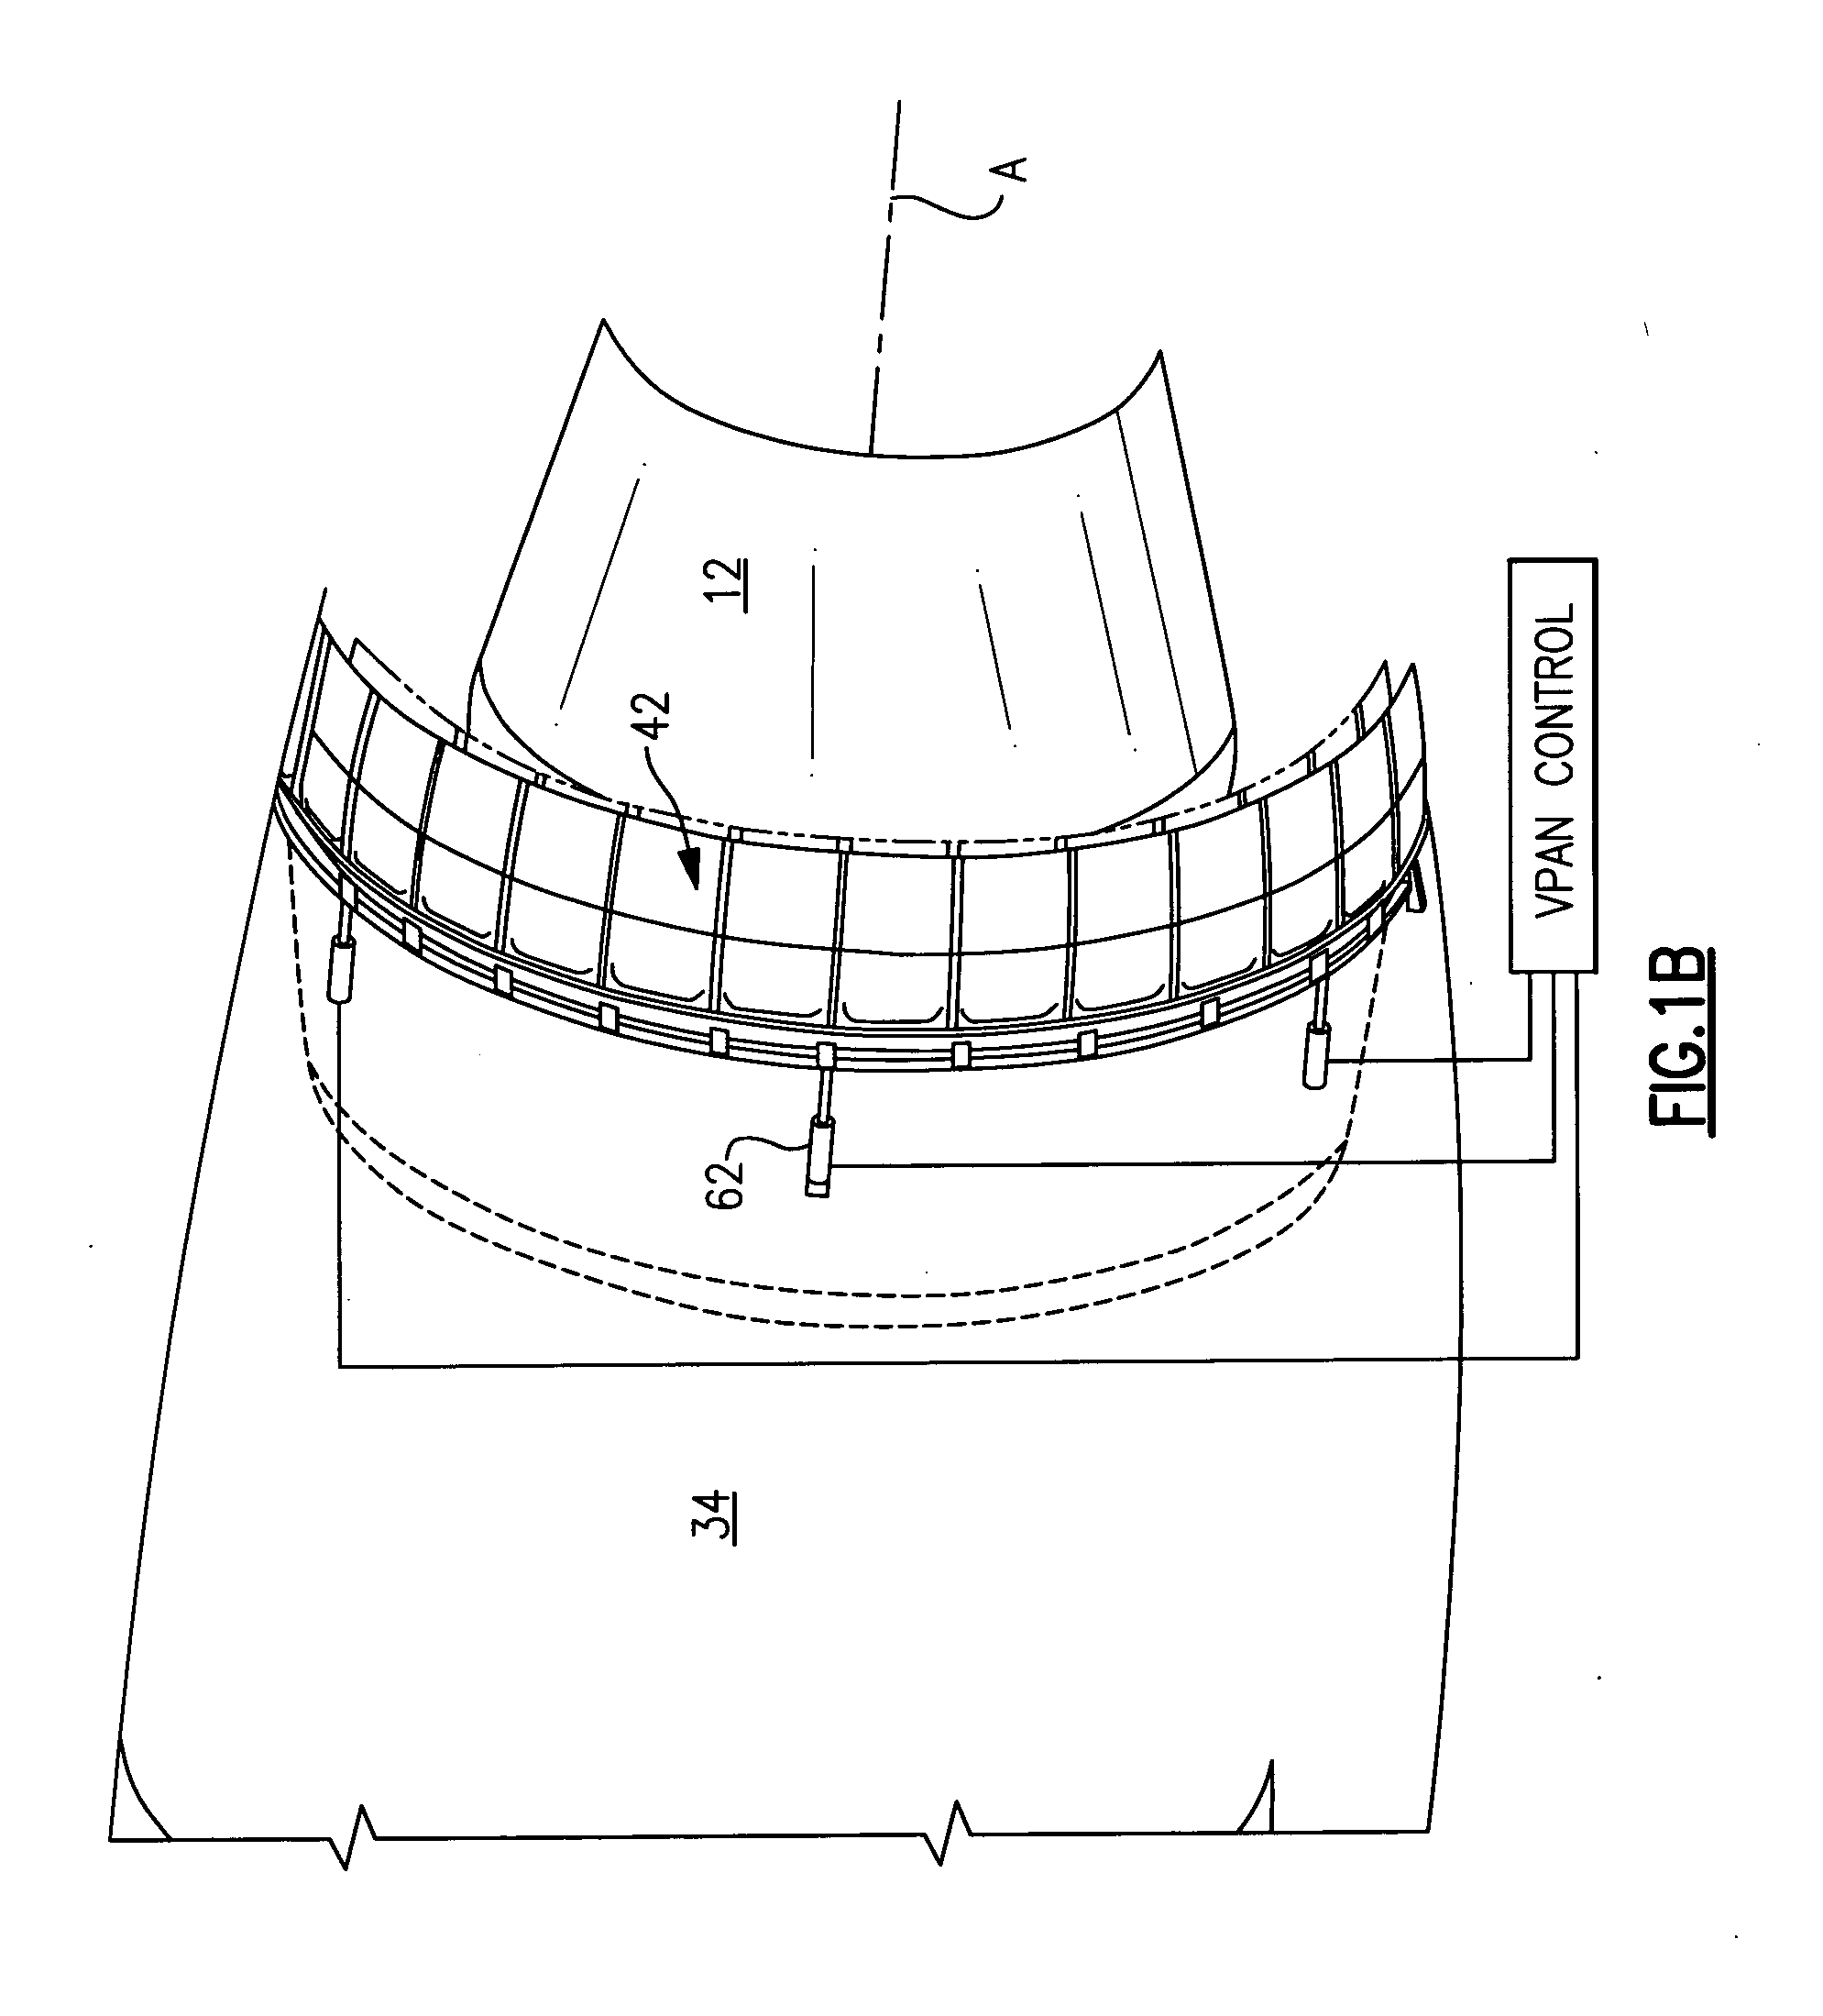 Fan variable area nozzle for a gas turbine engine fan nacelle with sliding actuation system